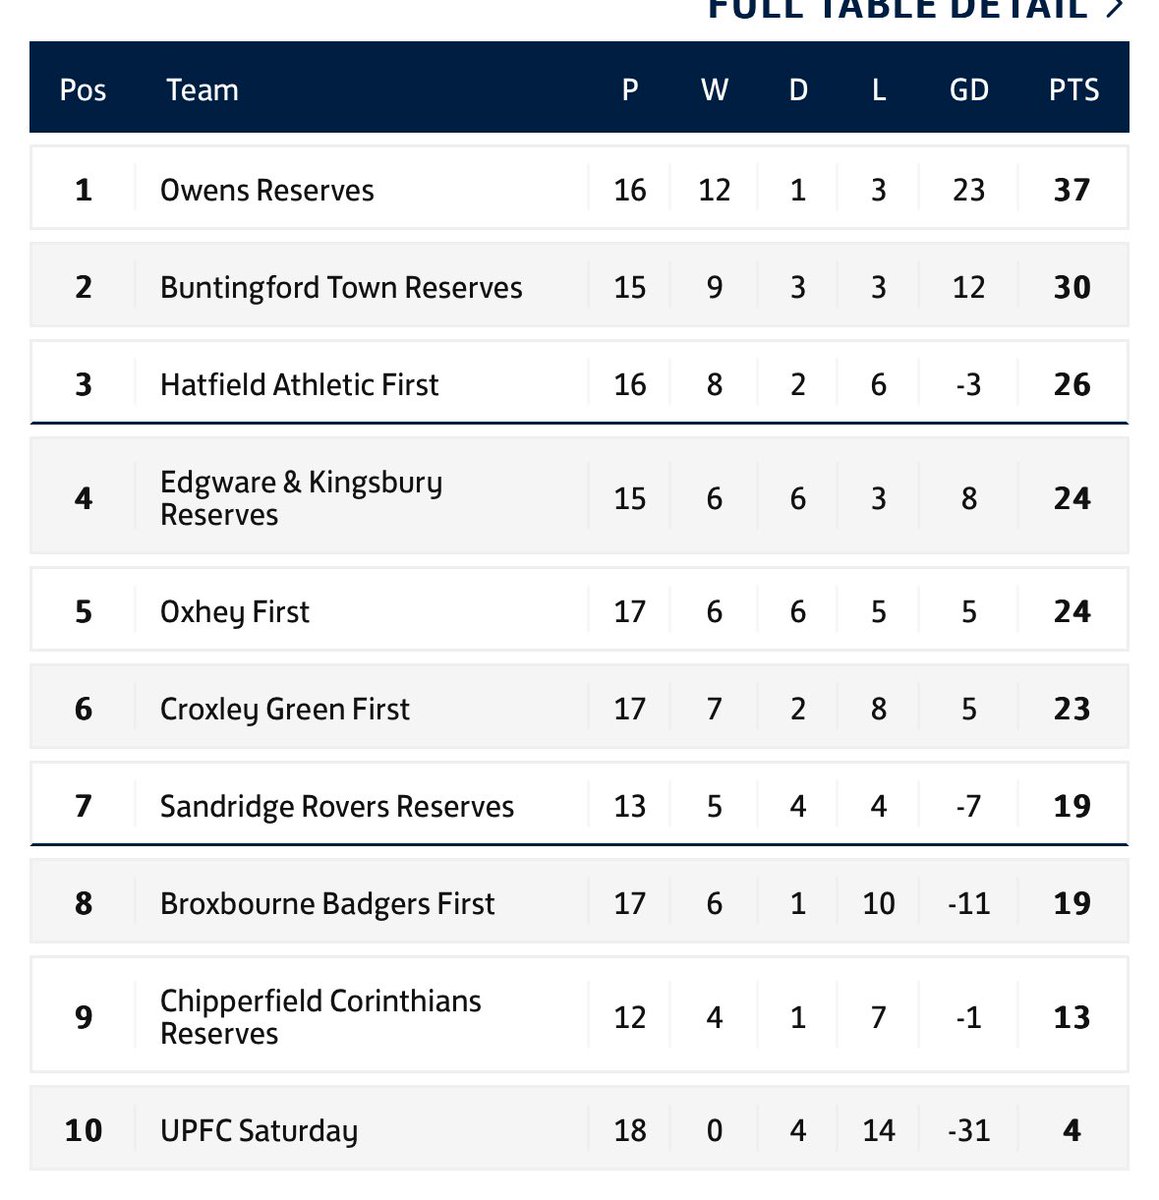 It’s going to be an exciting end to the season🤩

4 teams all fighting for the 3rd place promotion spot. All we can do is get positive results in our final 2 games and see where that puts us💪🏻

Fantastic advert for Division 2👏🏻

#UptheAth